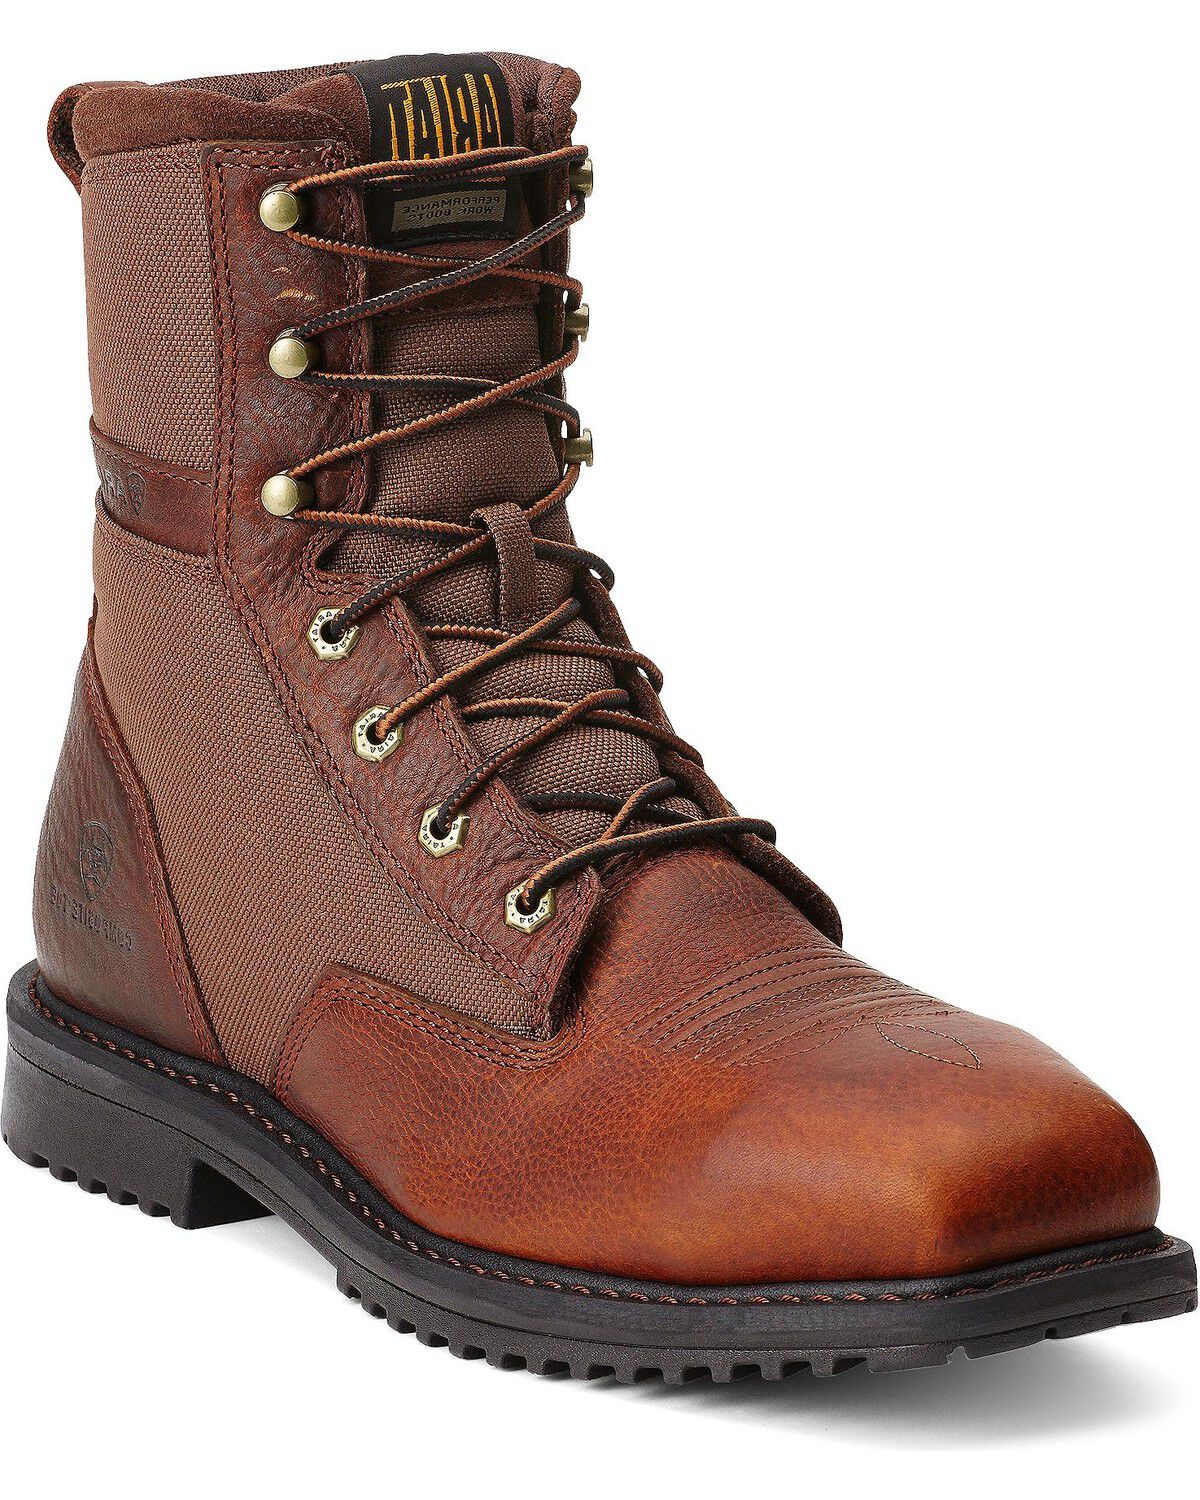 steel toe lace up boots